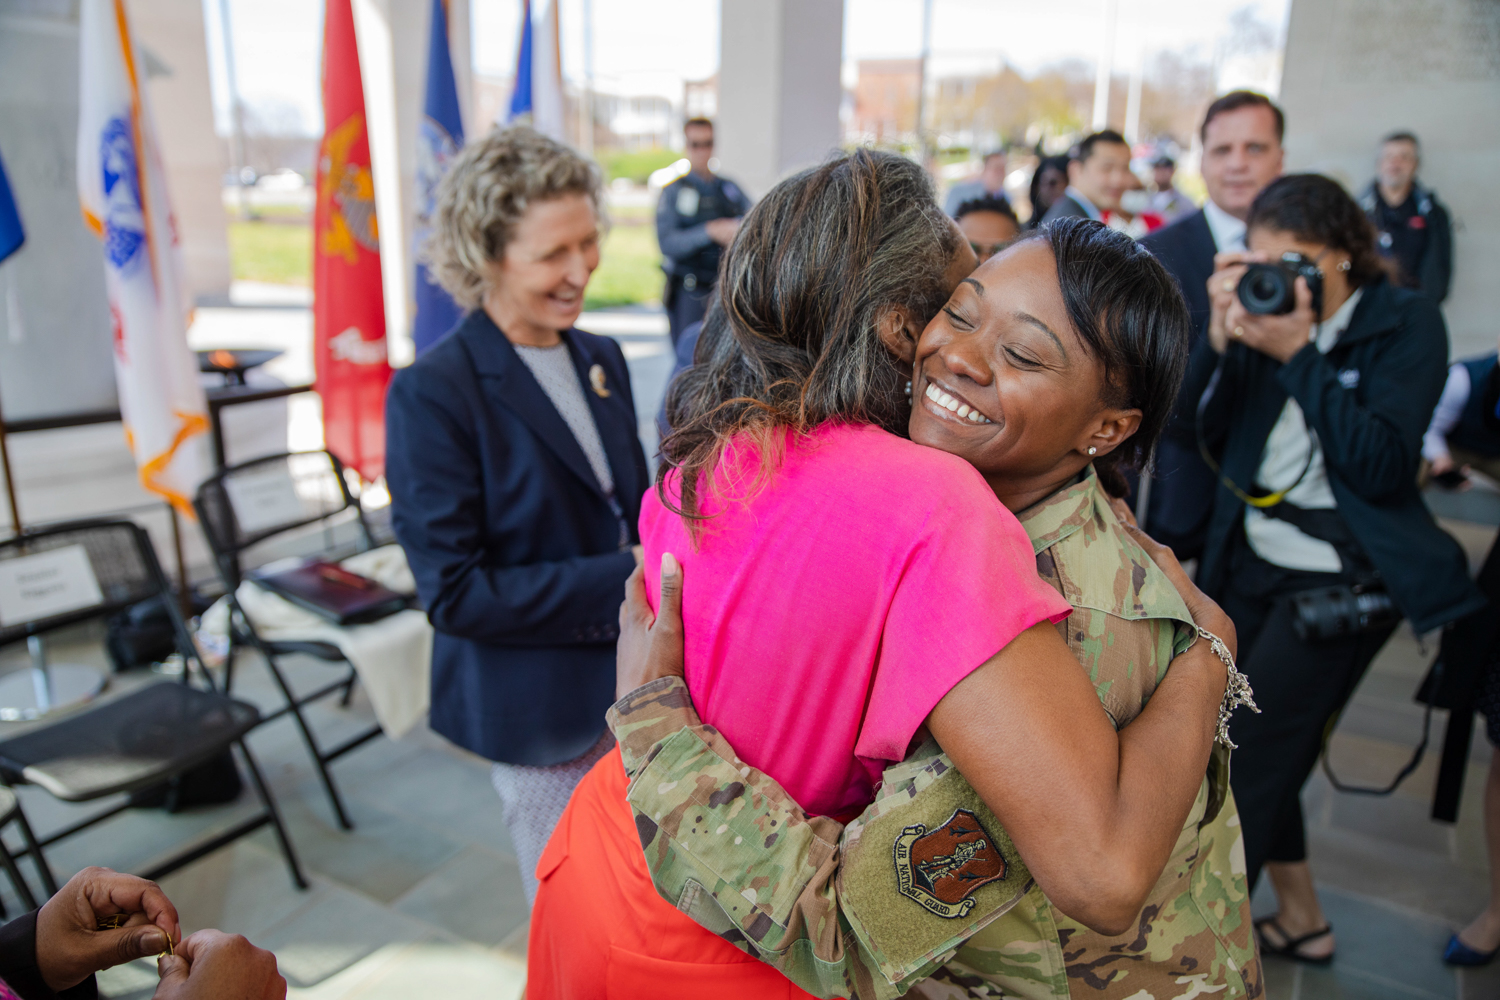 Celebrating the 75th anniversary of women gaining the right to officially serve in the military